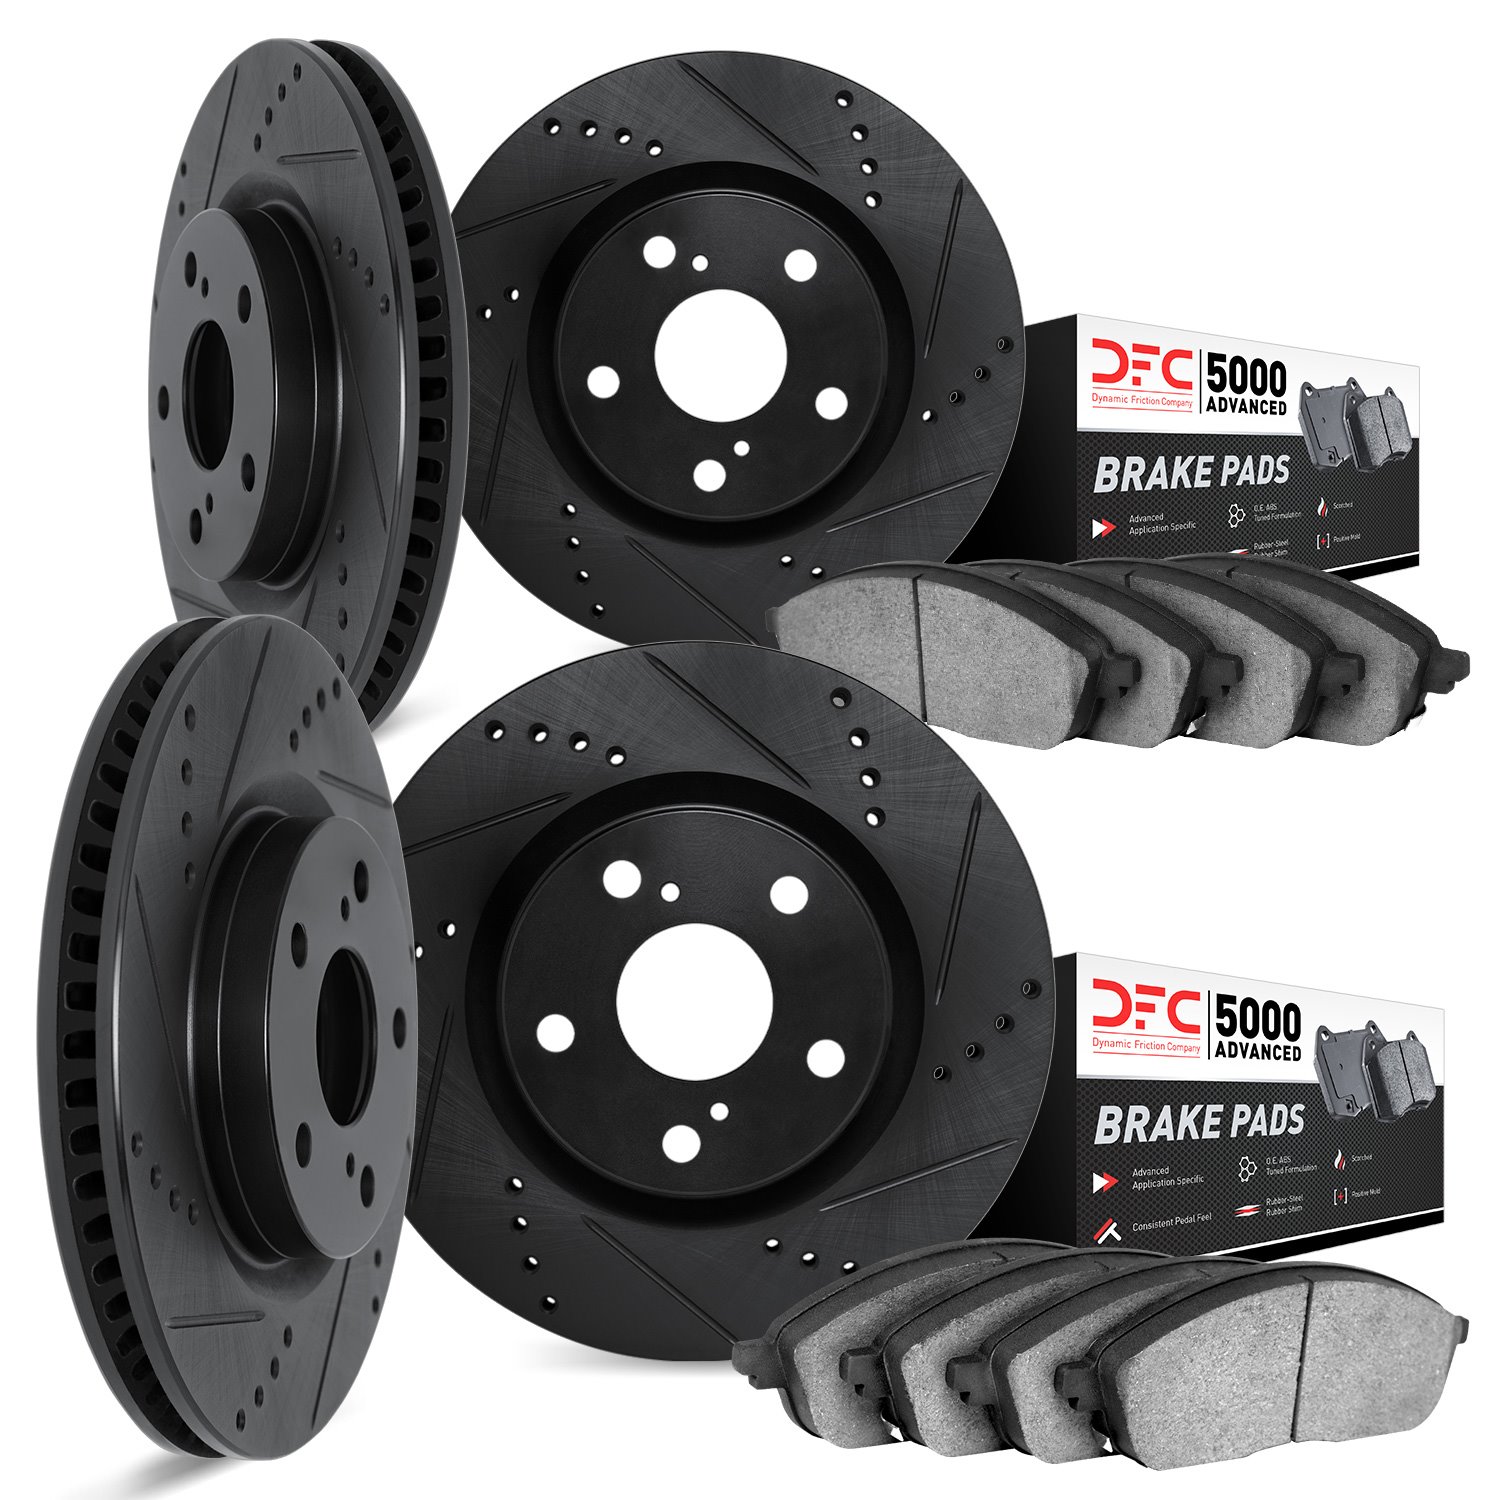 8504-31076 Drilled/Slotted Brake Rotors w/5000 Advanced Brake Pads Kit [Black], Fits Select Mini, Position: Front and Rear